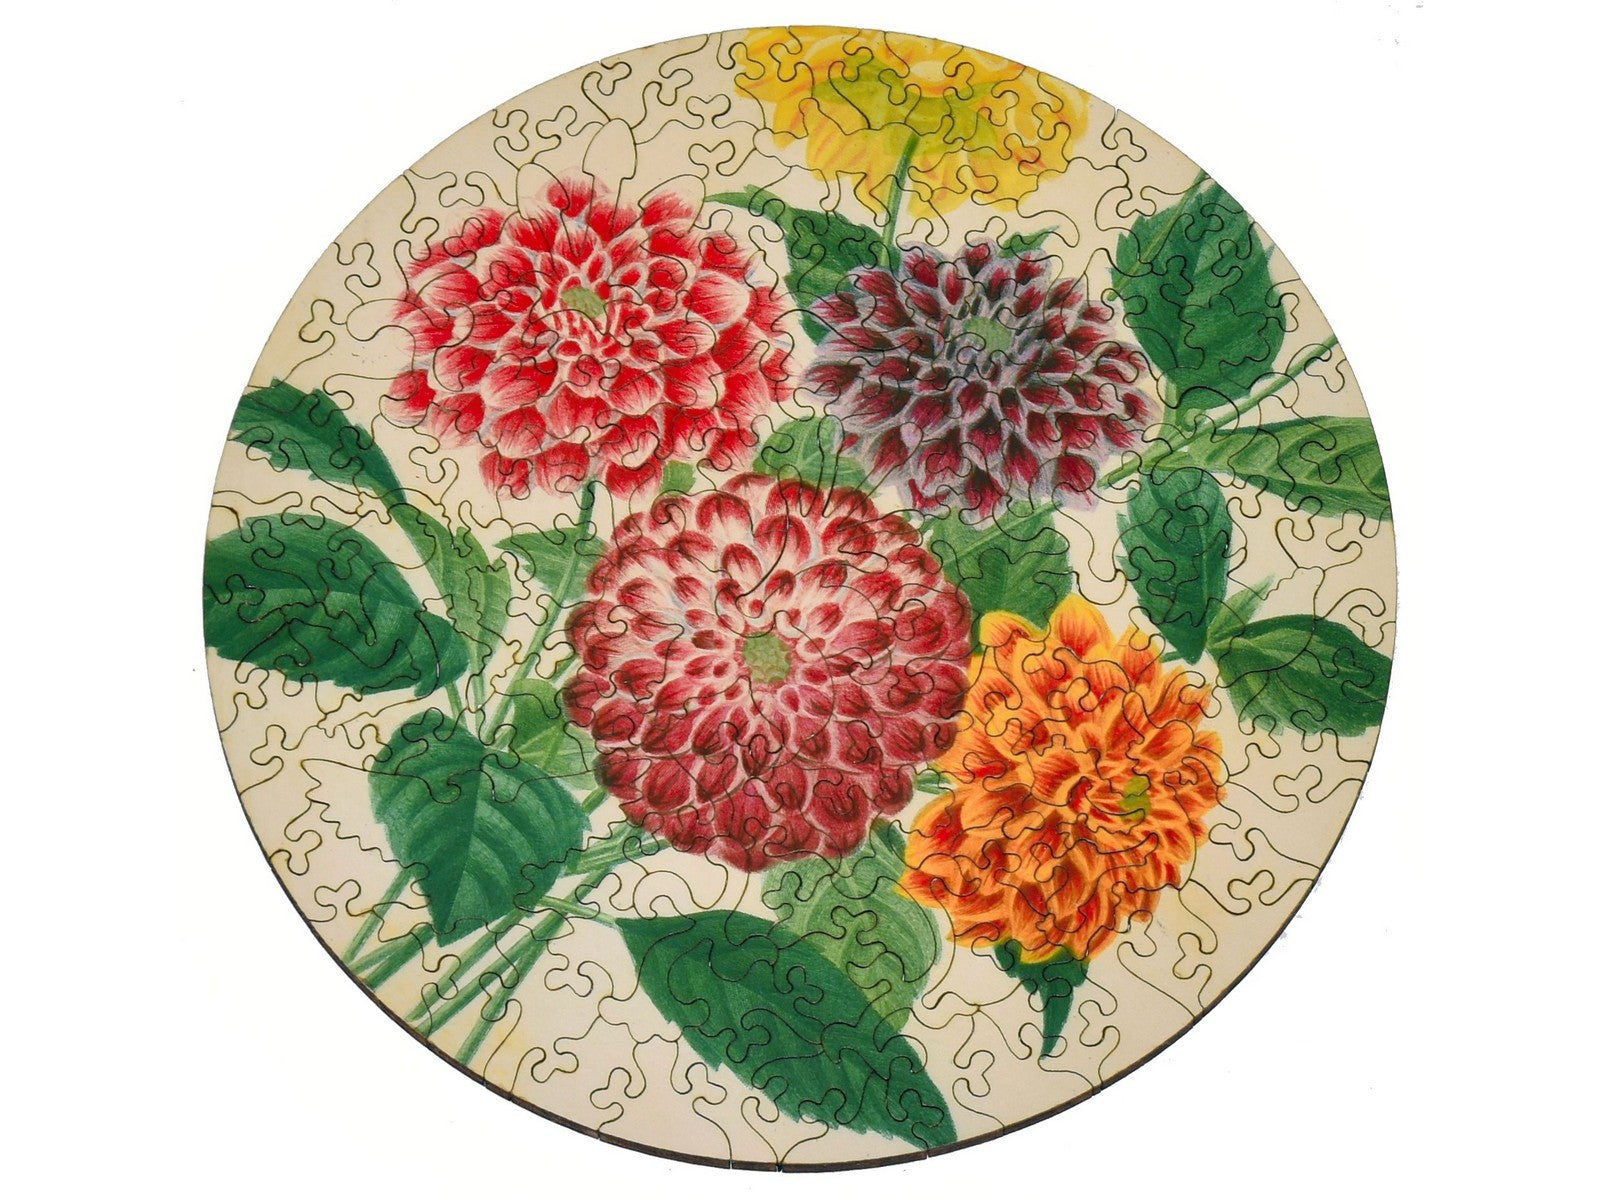 The front of the puzzle, Dahlias, which shows brightly colored flowers.